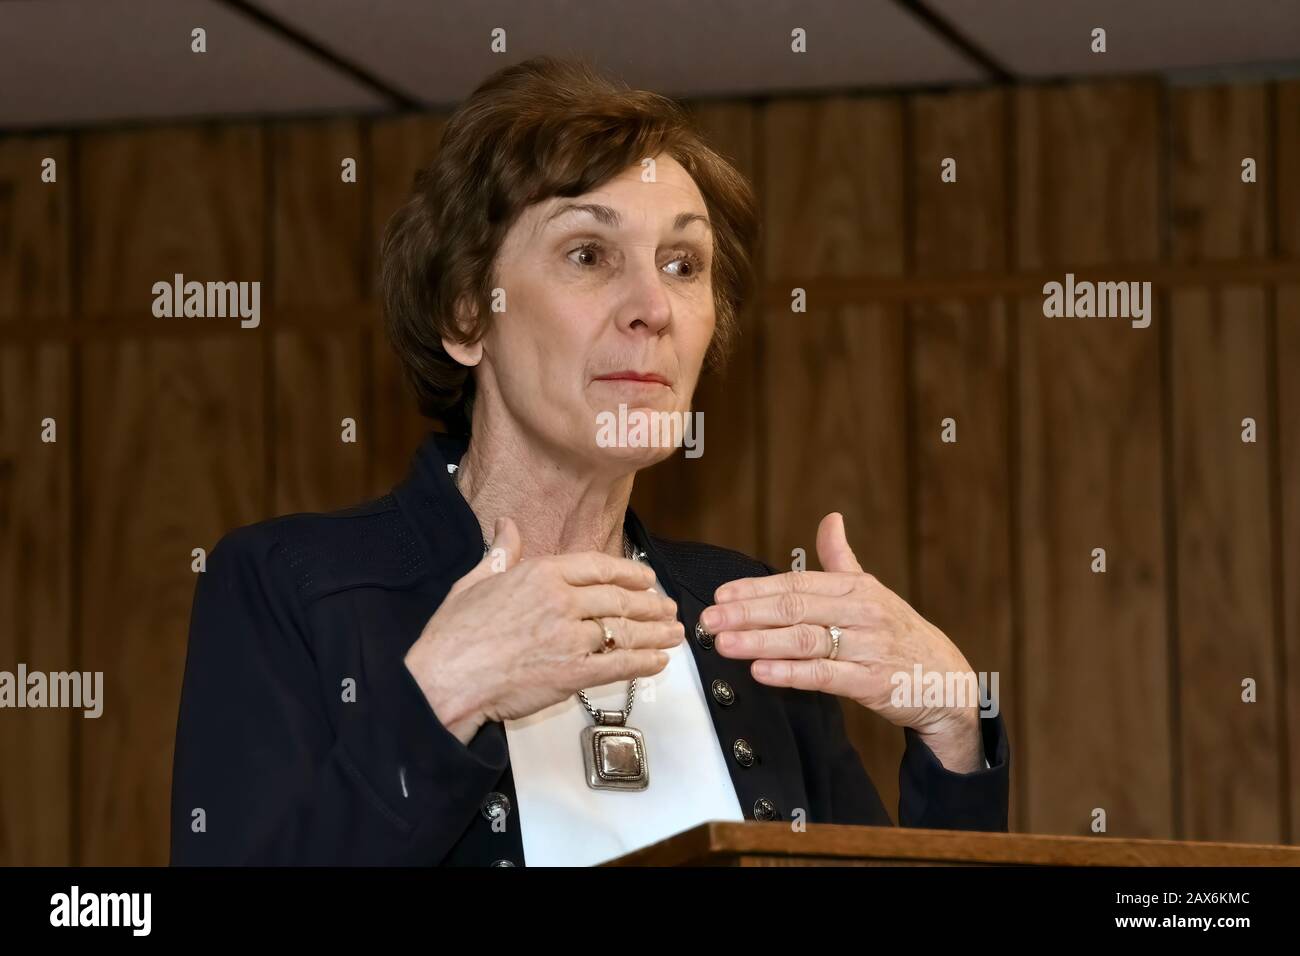 Barbara Lyon High Resolution Stock Photography and Images - Alamy